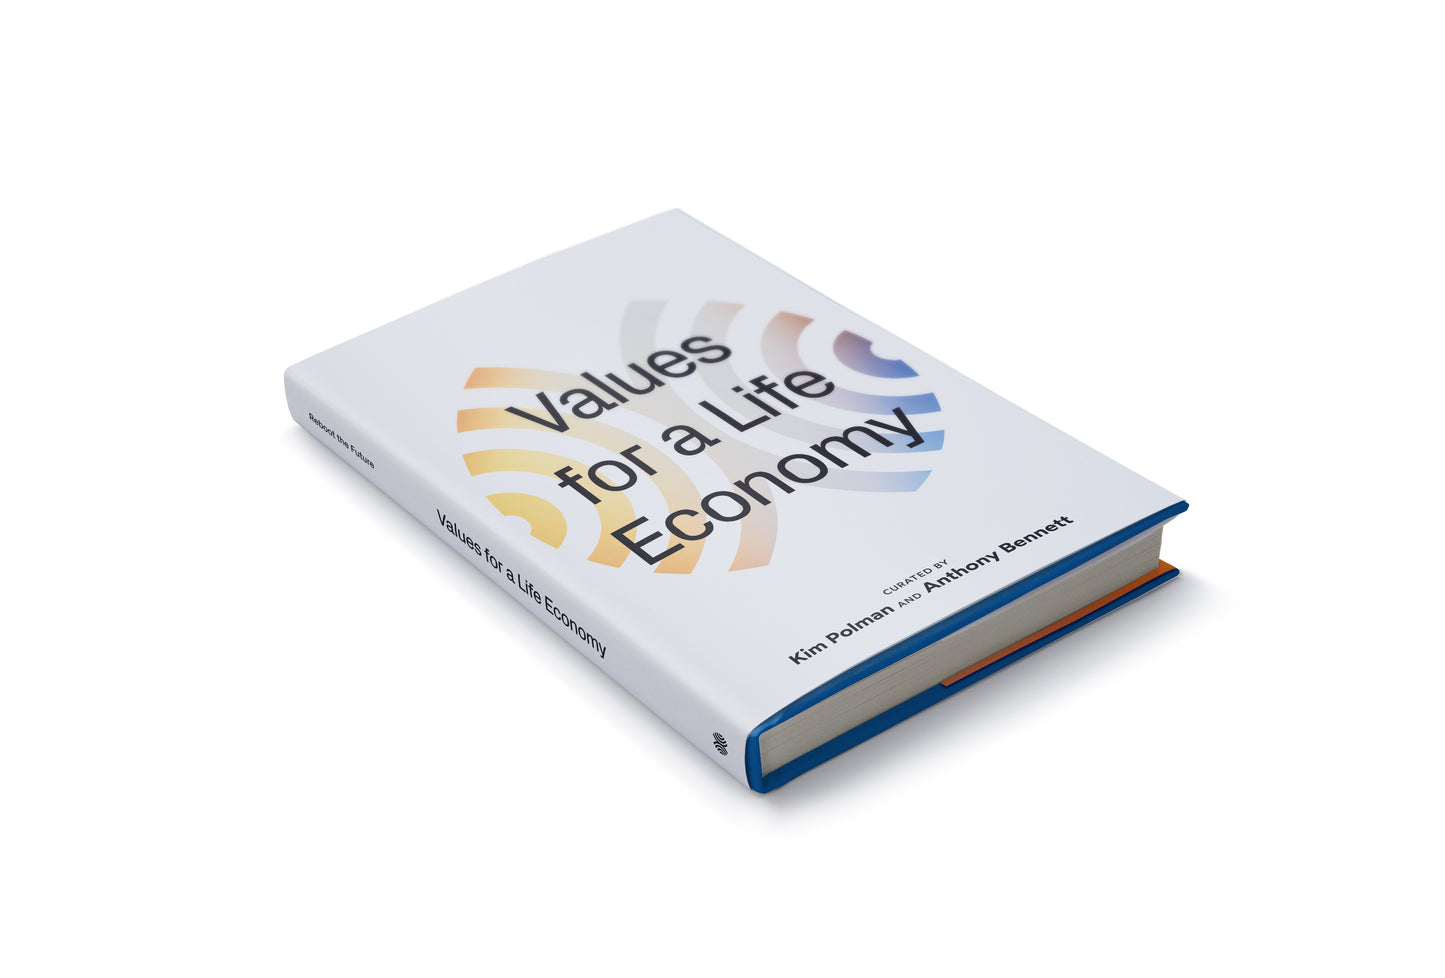 Values for a Life Economy